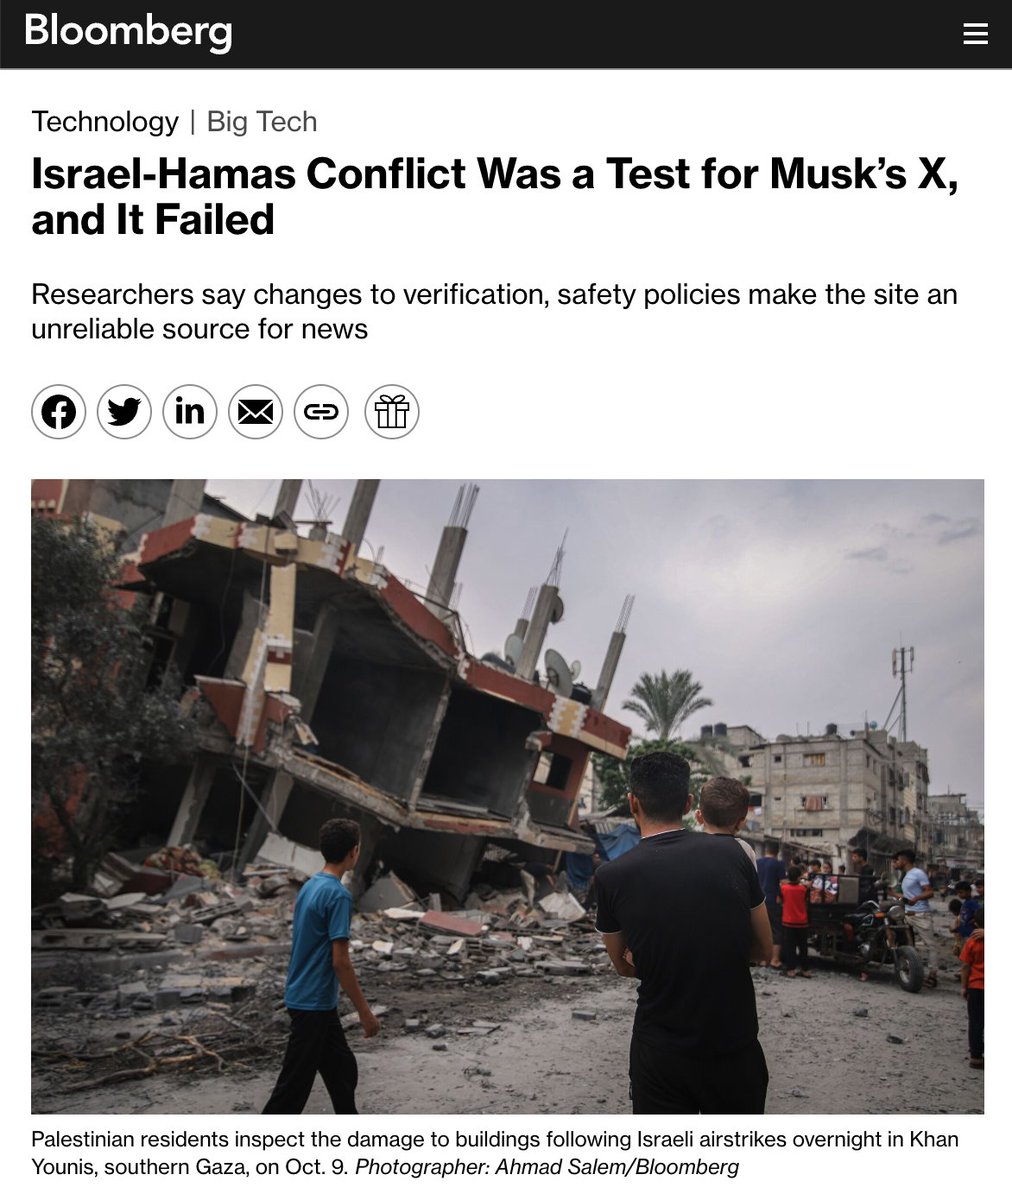 NEW: Spent the day immersed in viral falsehoods about the Israel-Hamas conflict that spread over the weekend and into Monday. Here's what we're bringing back from the misinformation trenches. (gift link) w/ @dzuidijk bloomberg.com/news/articles/…